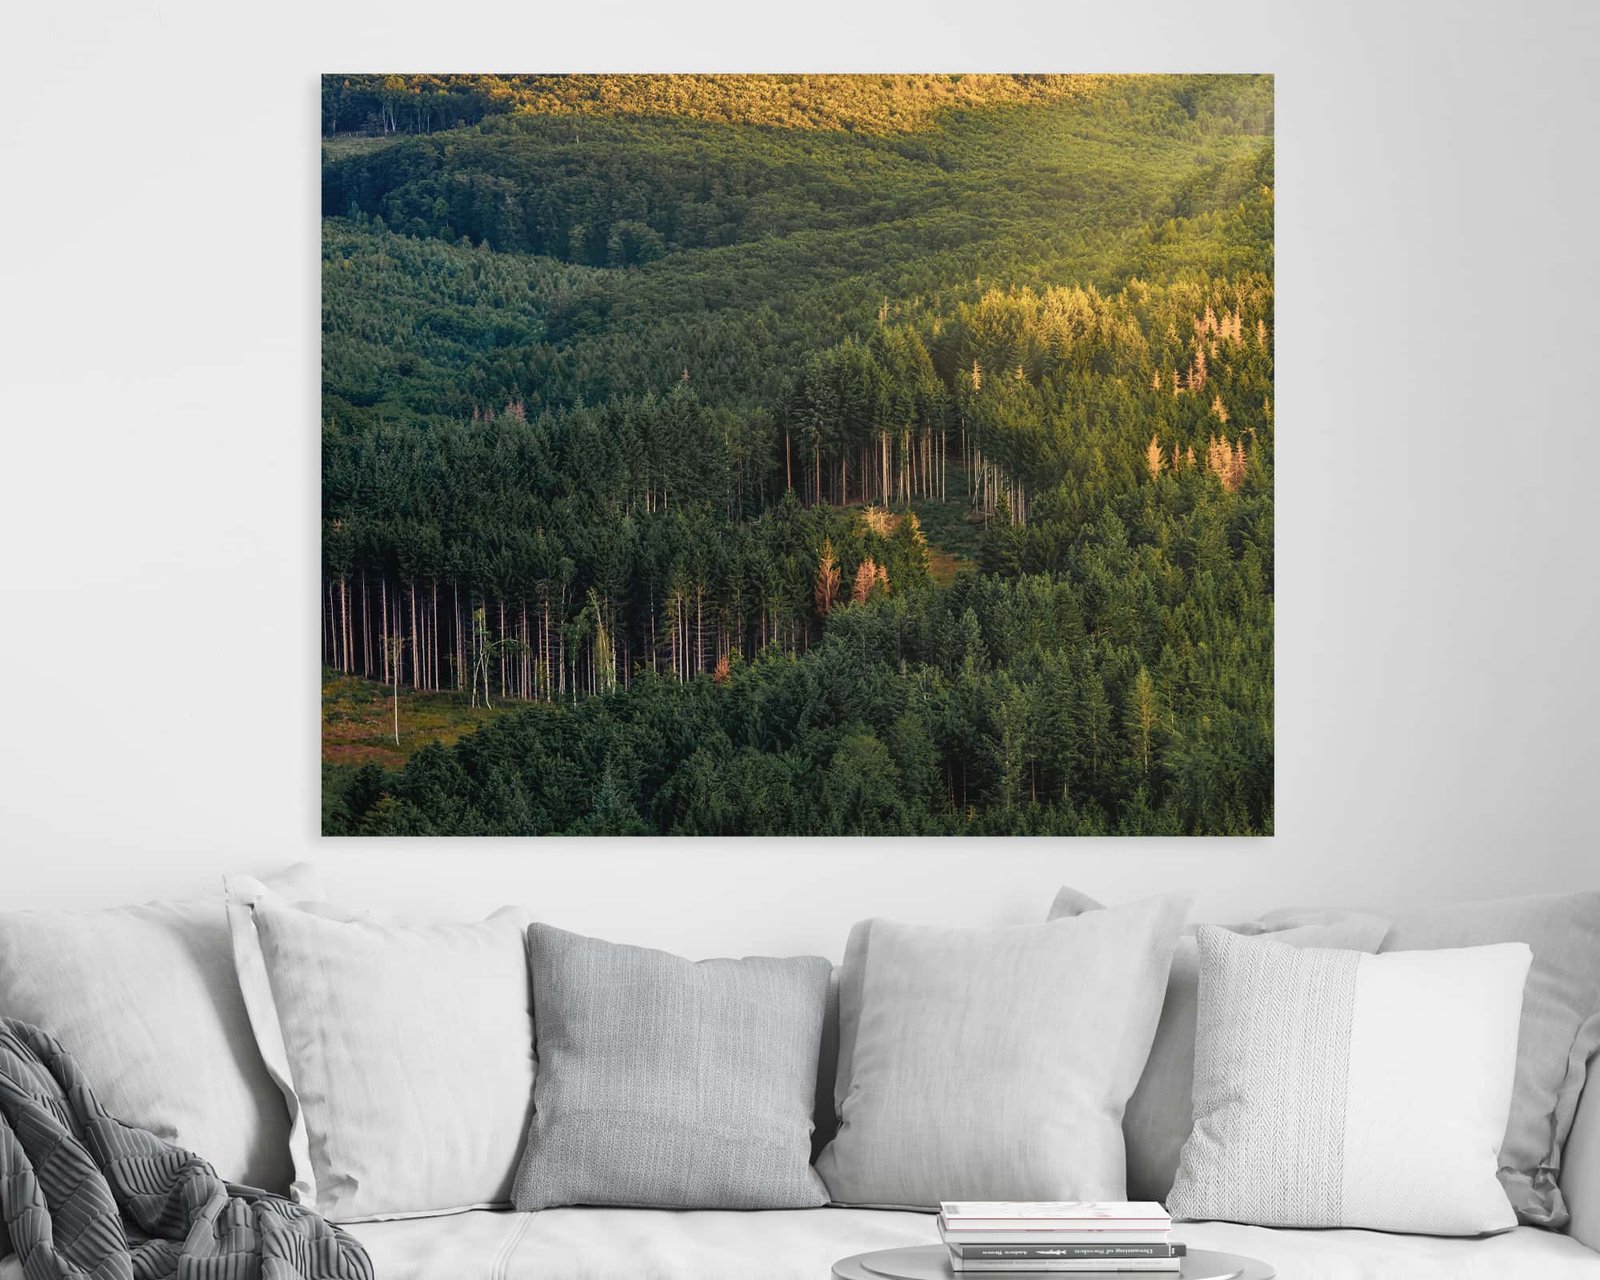 Photograph of a sunny forest hanging on a home's wall